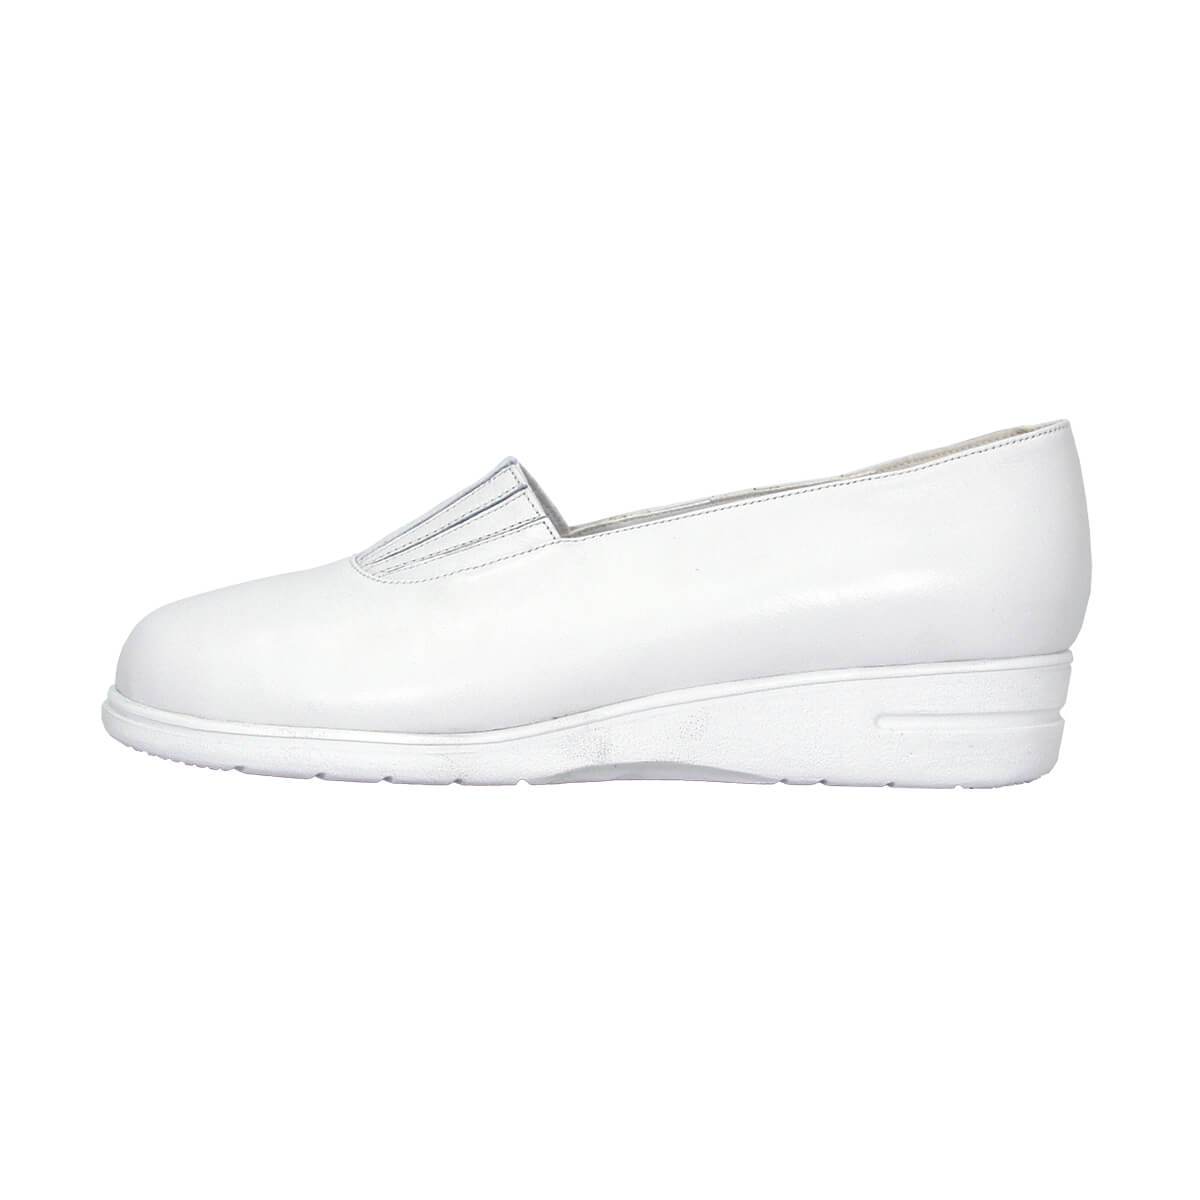 24 HOUR COMFORT Katy Women's Wide Width Leather Slip-On Shoes